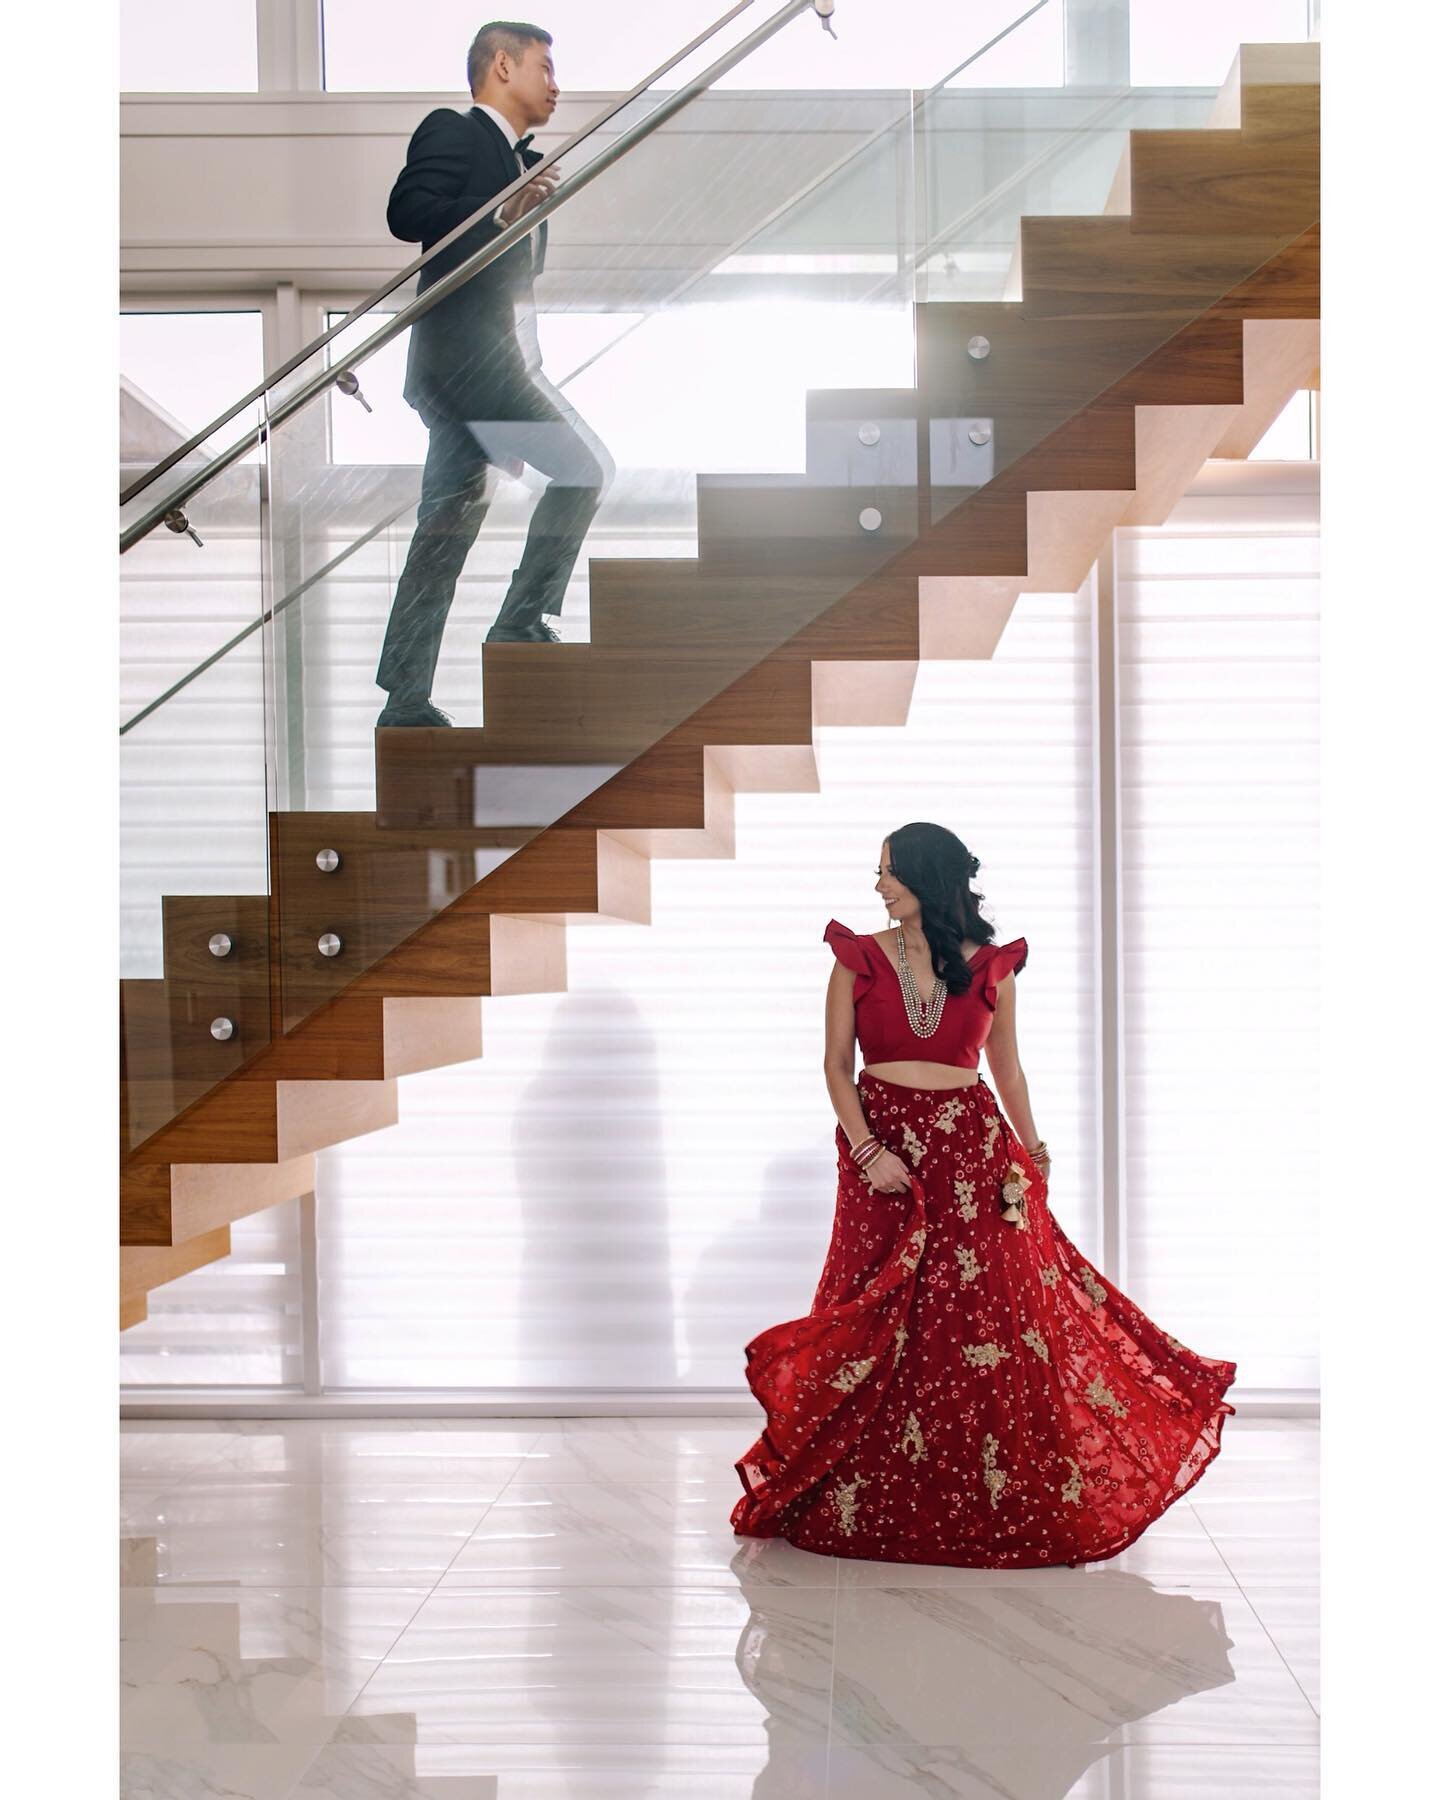 Nothing is more special than the first look &hearts;️

P.S. can we talk about how amazing these shots are?!😍 great job @mathiasfast 👌🏽 

✨For bookings and inquiries please email info@nalinimaharaj.com or text 604-727-0285 ✨

#firstlook #brideandgr